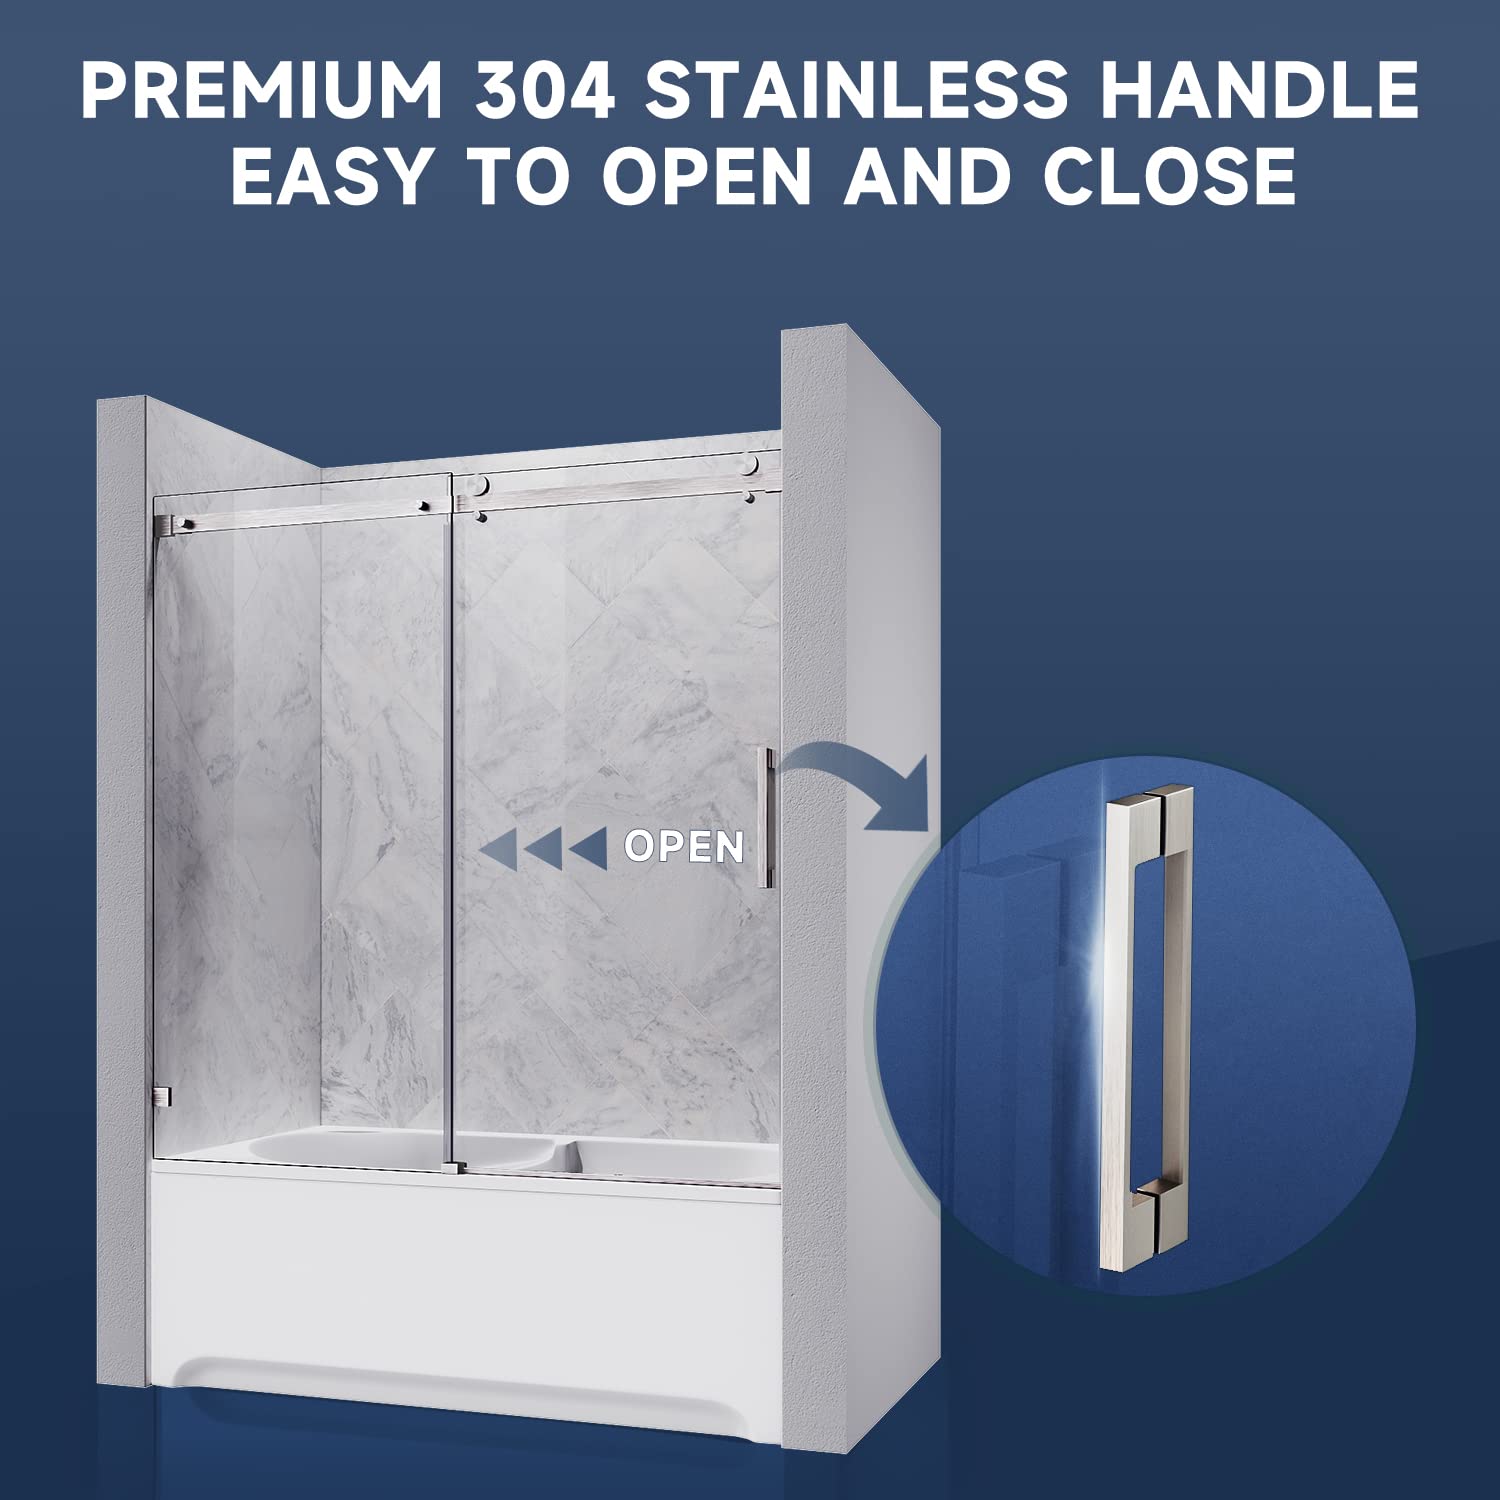 premium 304 stainless handle, easy to open and close